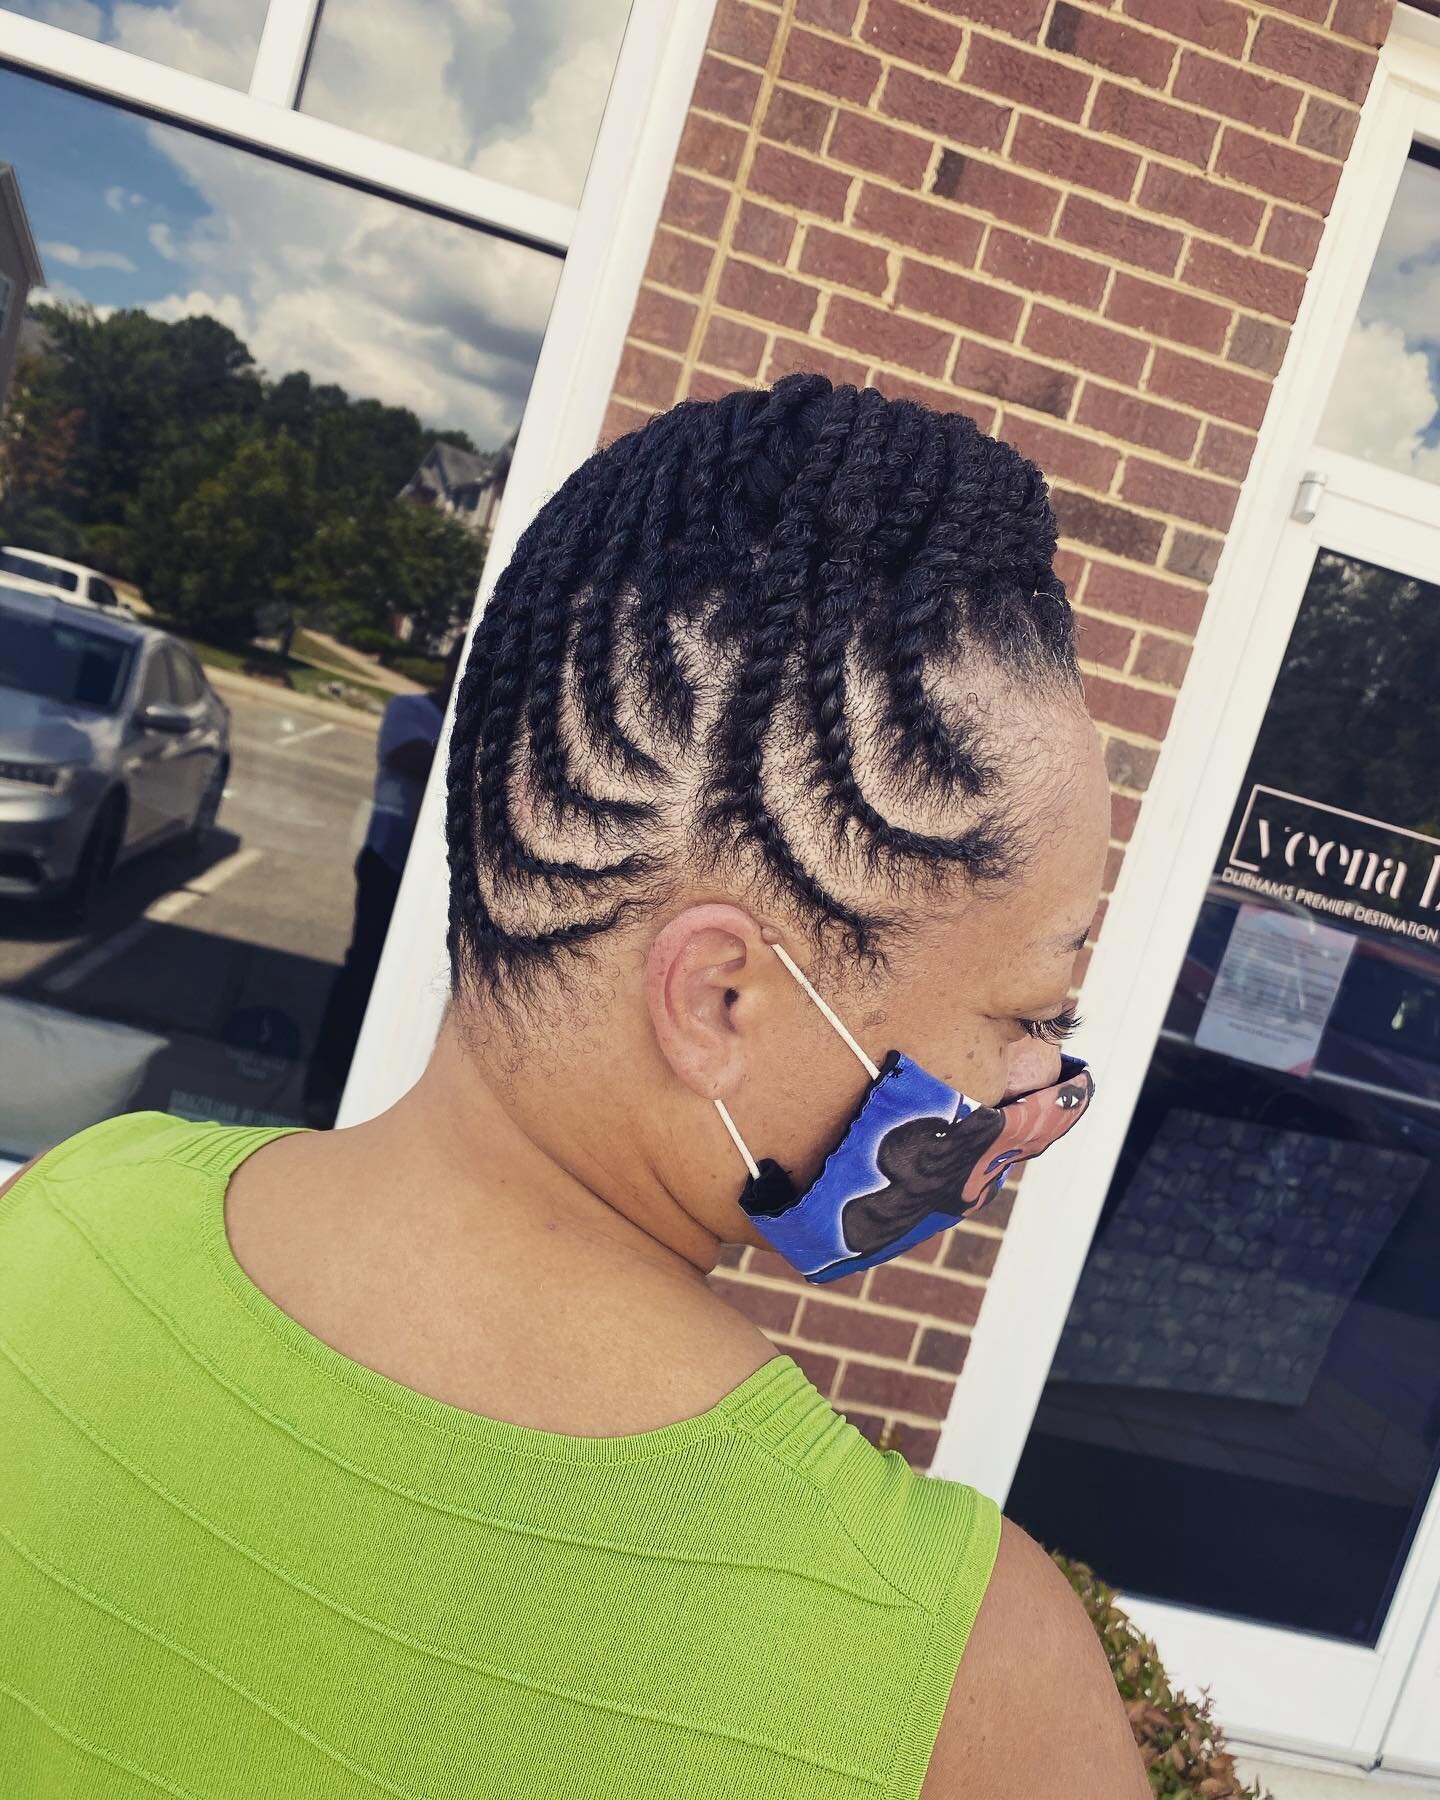 Beautiful Natural updo with flat  twists. ✨Low tension and fabulous! 

Head to bvaliantsalon.com to book with us now! ❤️. See you soon. 

#Bvalianthair #bvalianthairsalon #naturalhair #healthyhair #naturalhairsalon #naturalhairsalons #ncnaturalhairst